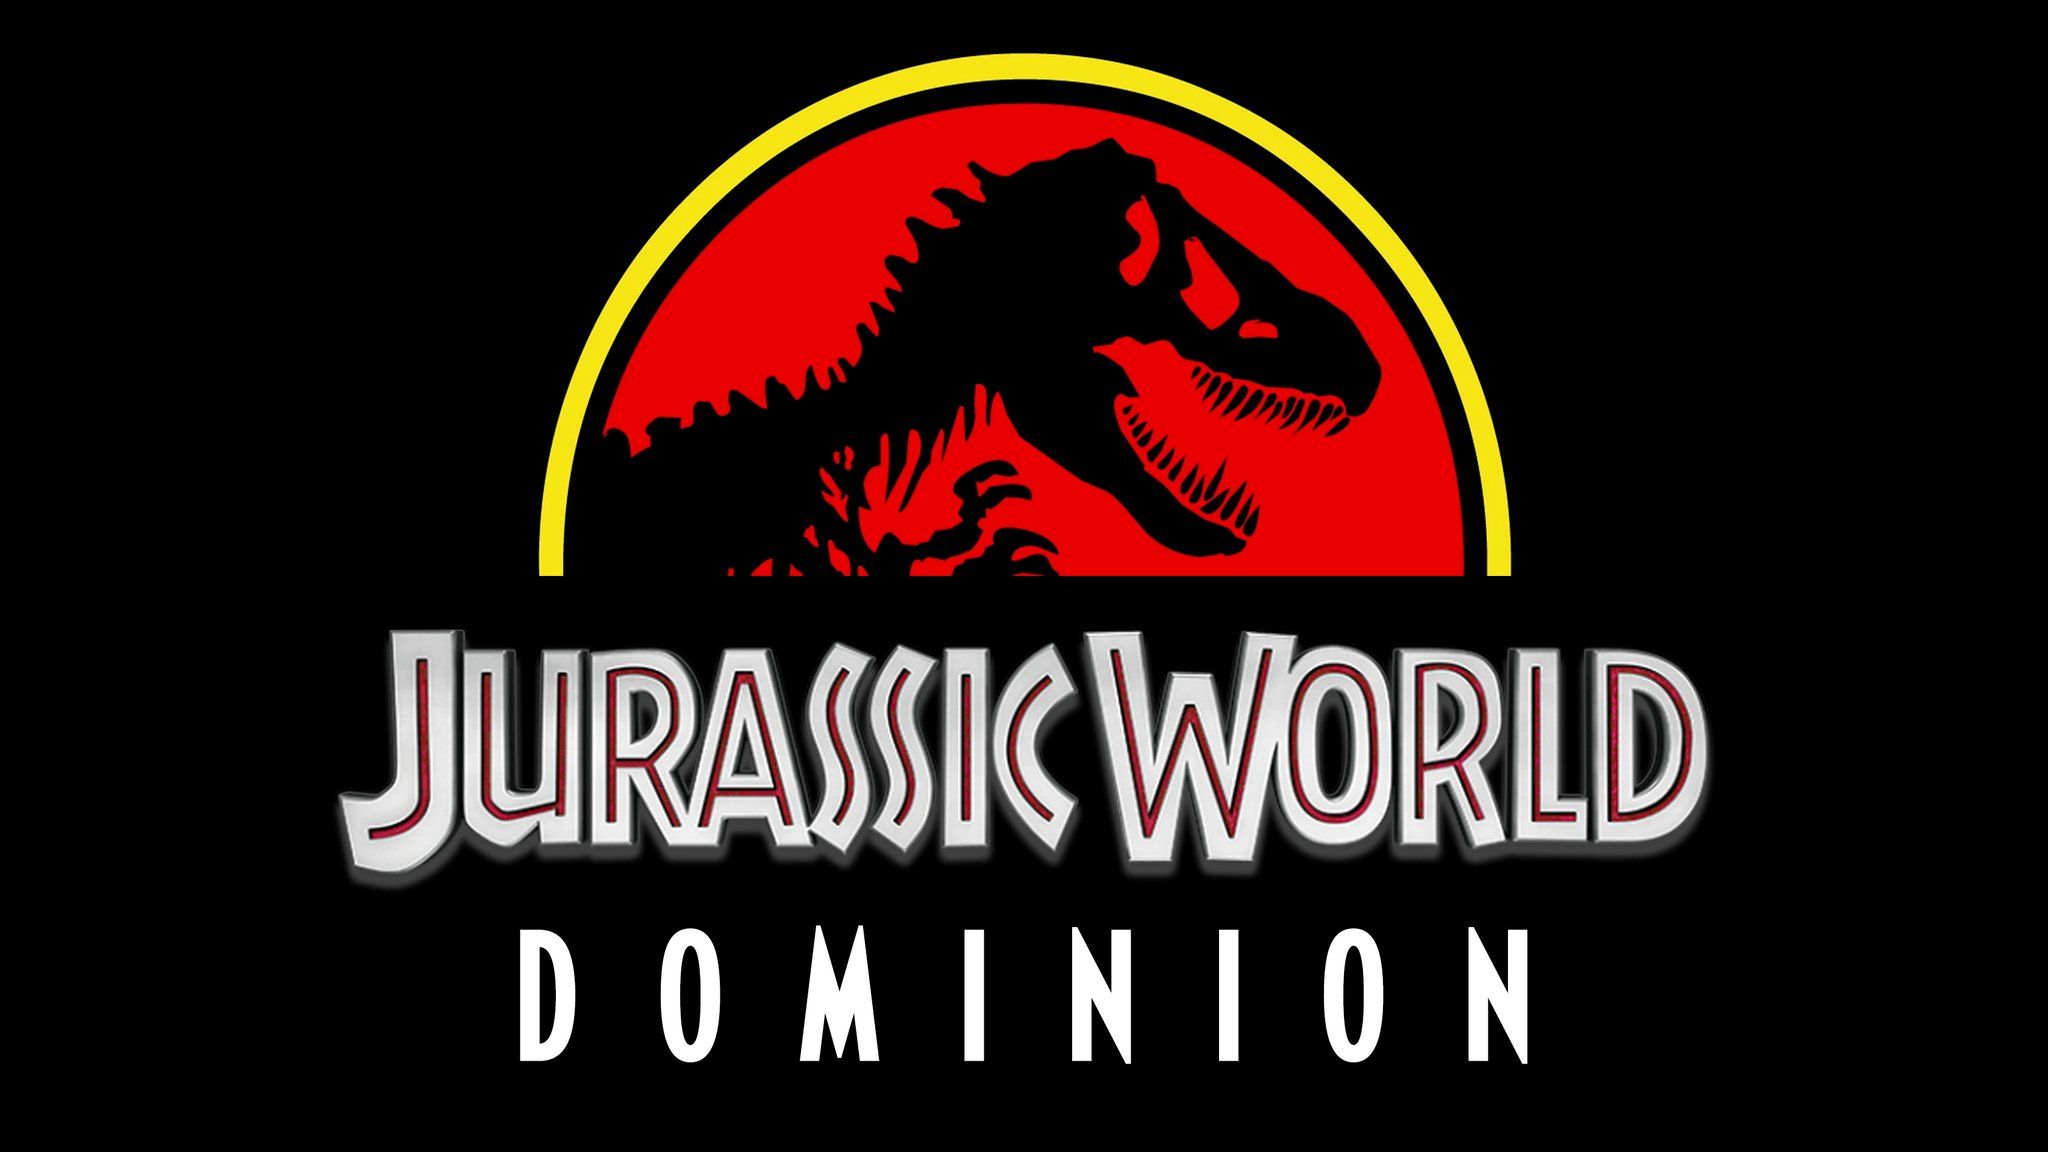 Lights, Camera, Pod title for 'Jurassic World 3' may be 'Jurassic World: Dominion' according to a photo tweeted